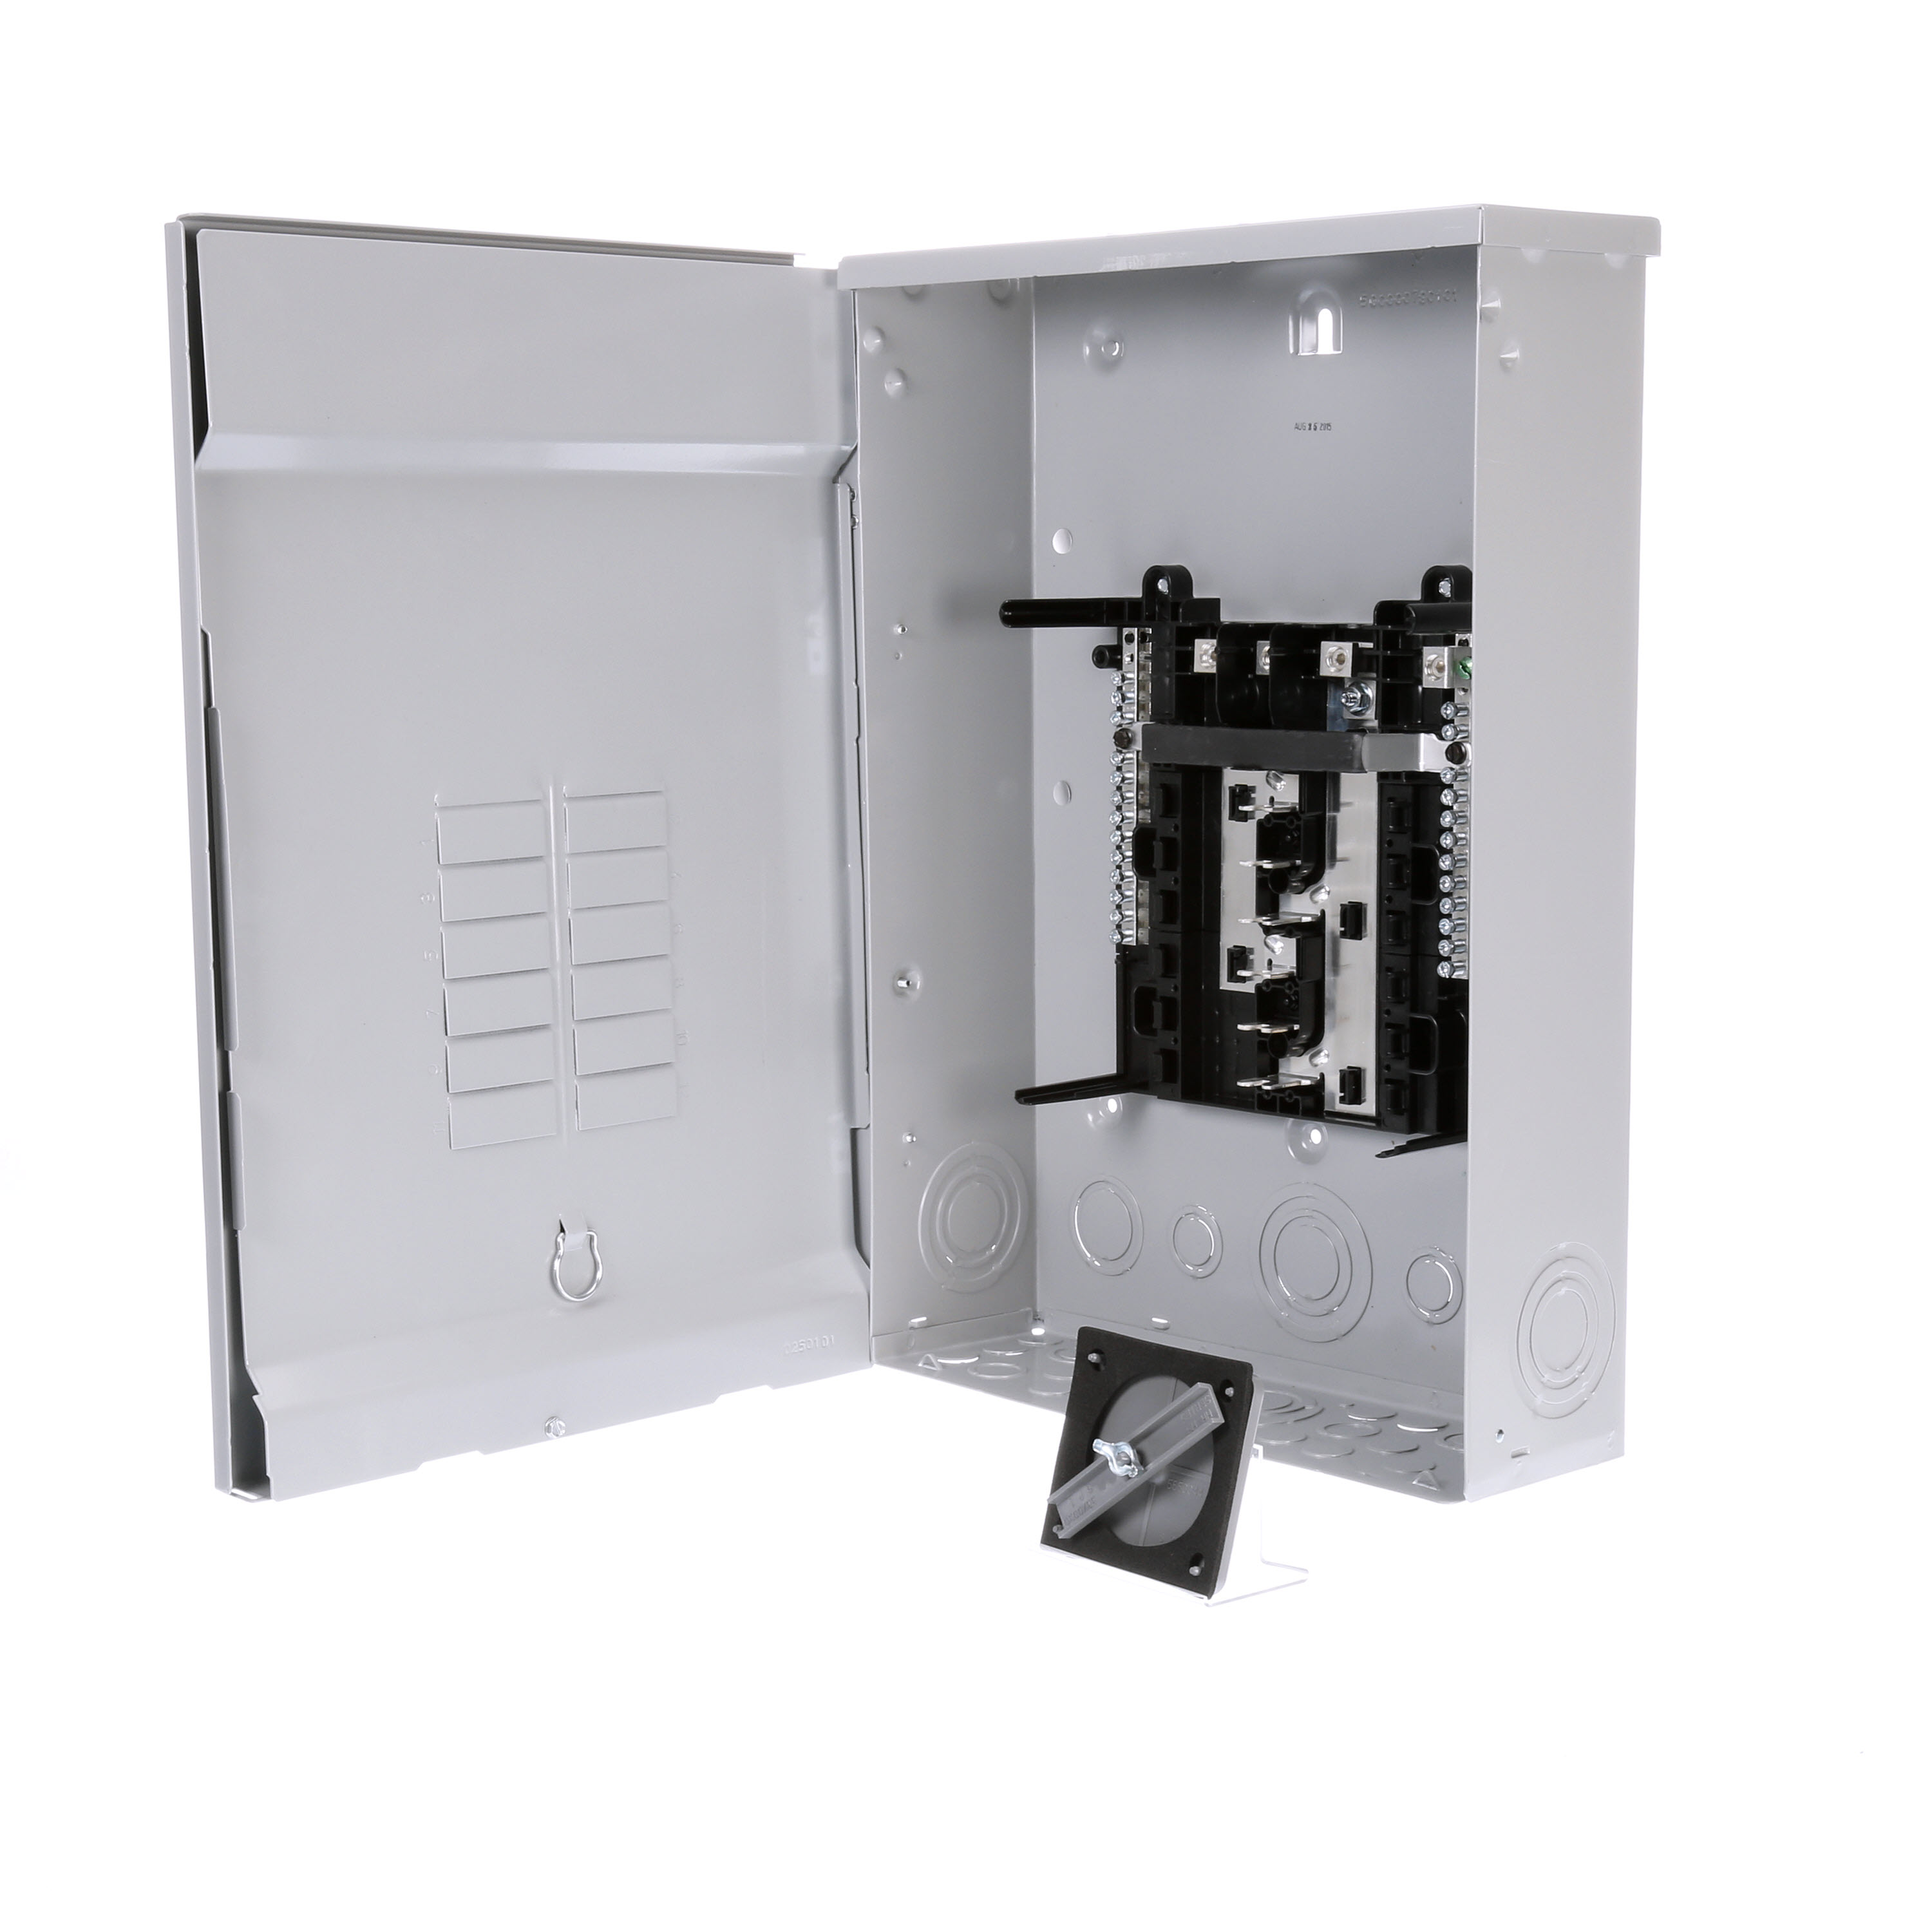 SIEMENS LOW VOLTAGE ES SERIES LOAD CENTER. MAIN LUG WITH 12 1-INCH SPACES ALLOWING MAX 24 CIRCUITS. 3-PHASE 4-WIRE SYSTEM RATED 120/240V OR 120/208V (125A) 100KA INTERRUPT. SPECIAL FEATURES ALUMINUM BUS, GRAY TRIM, NEMA TYPE3R ENCLOSURE FOR OUTDOOR USE.